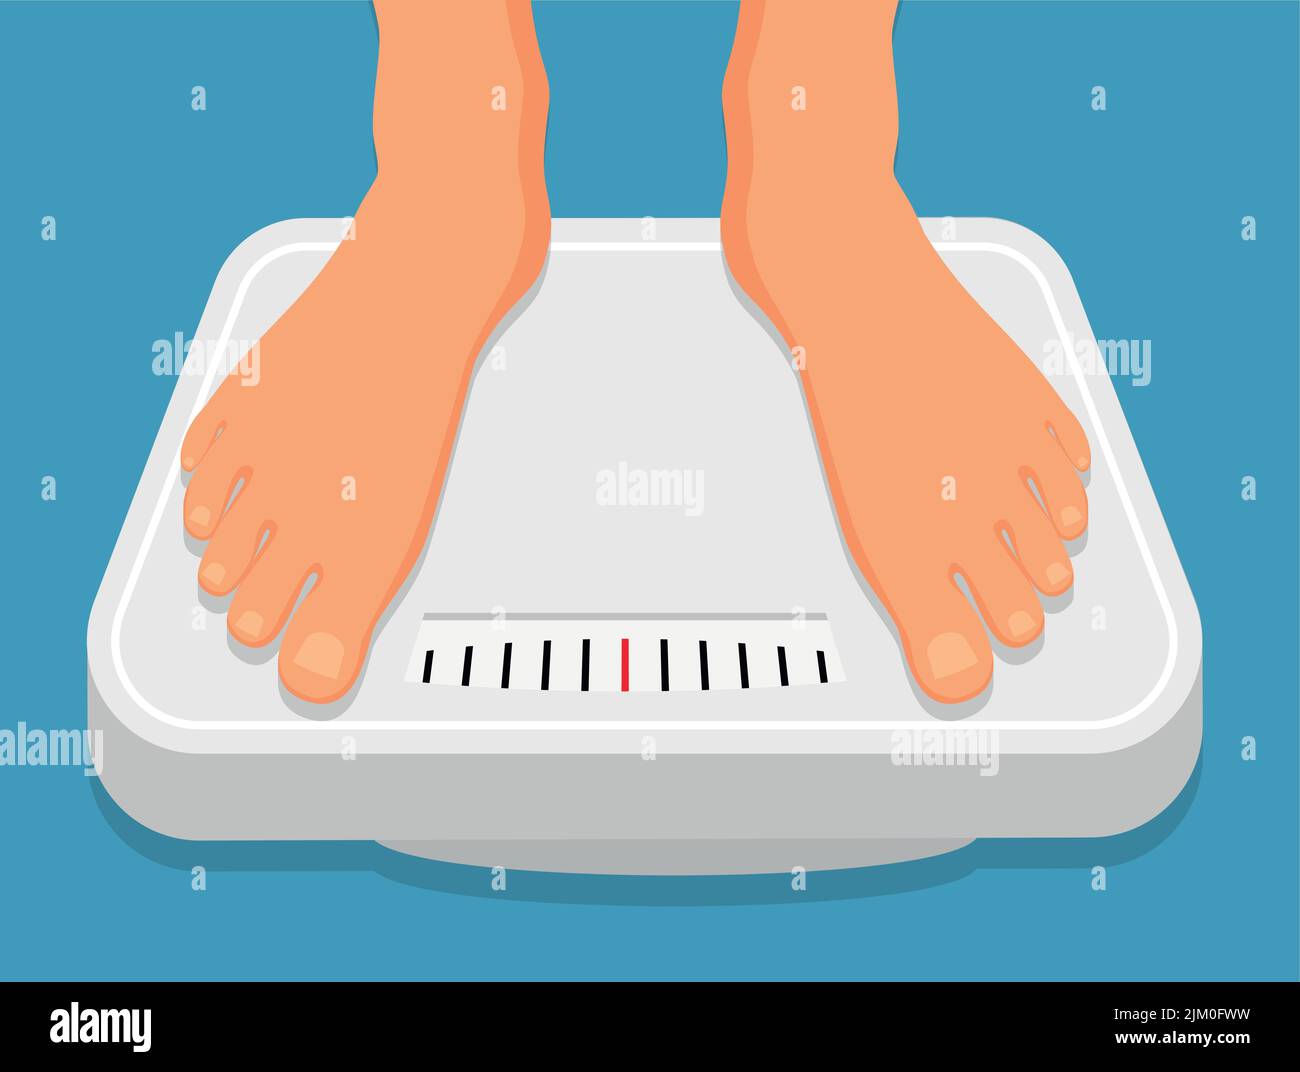 https://c8.alamy.com/comp/2JM0FWW/woman-is-standing-on-bathroom-scales-top-view-of-feet-weight-measurement-and-control-concept-of-healthy-lifestyle-dieting-and-fitness-2JM0FWW.jpg